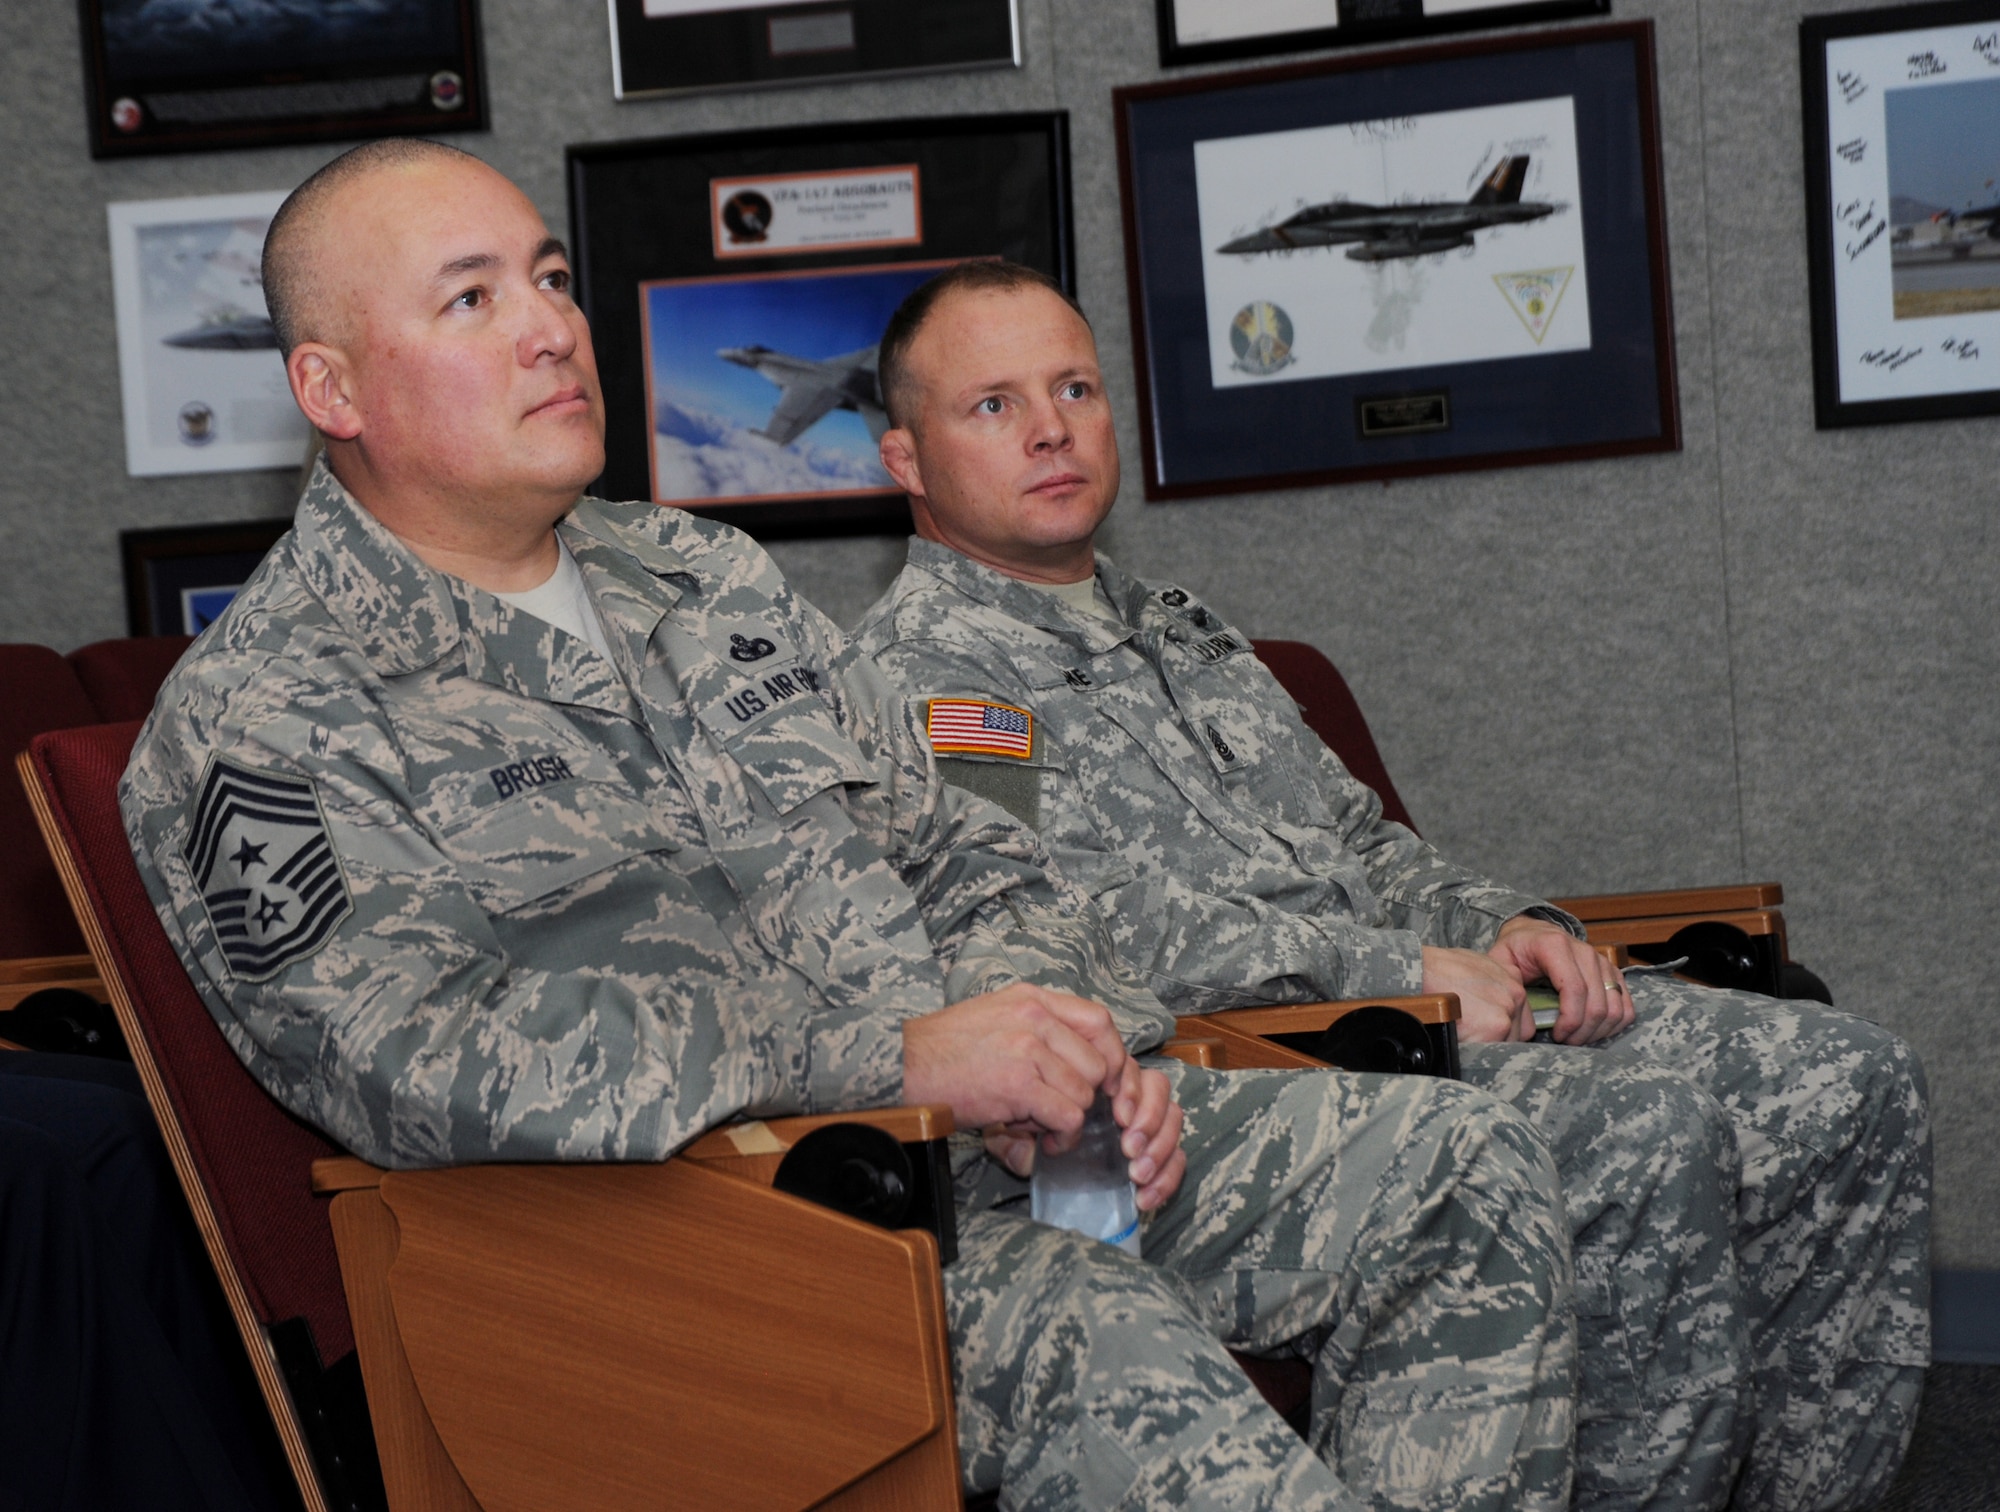 Chief Master Sgt. Mitchell O. Brush, Senior Enlisted Advisor for the National Guard Bureau, left, and SGM Shane Lake, Oregon National Guard Senior Enlisted Advisor, right, listen to remarks from senior enlisted leaders from the 142nd Fighter Wing during a briefing at the Portland Air National Guard Base, Ore., Jan. 5, 2015. Chief Brush toured the air base and led a town hall event to highlight the changes and challenges that Soldiers and Airmen of the National Guard face going into the New Year. (U.S. Air National Guard photo by Tech. Sgt. John Hughel, 142nd Fighter Wing Public Affairs/Released)